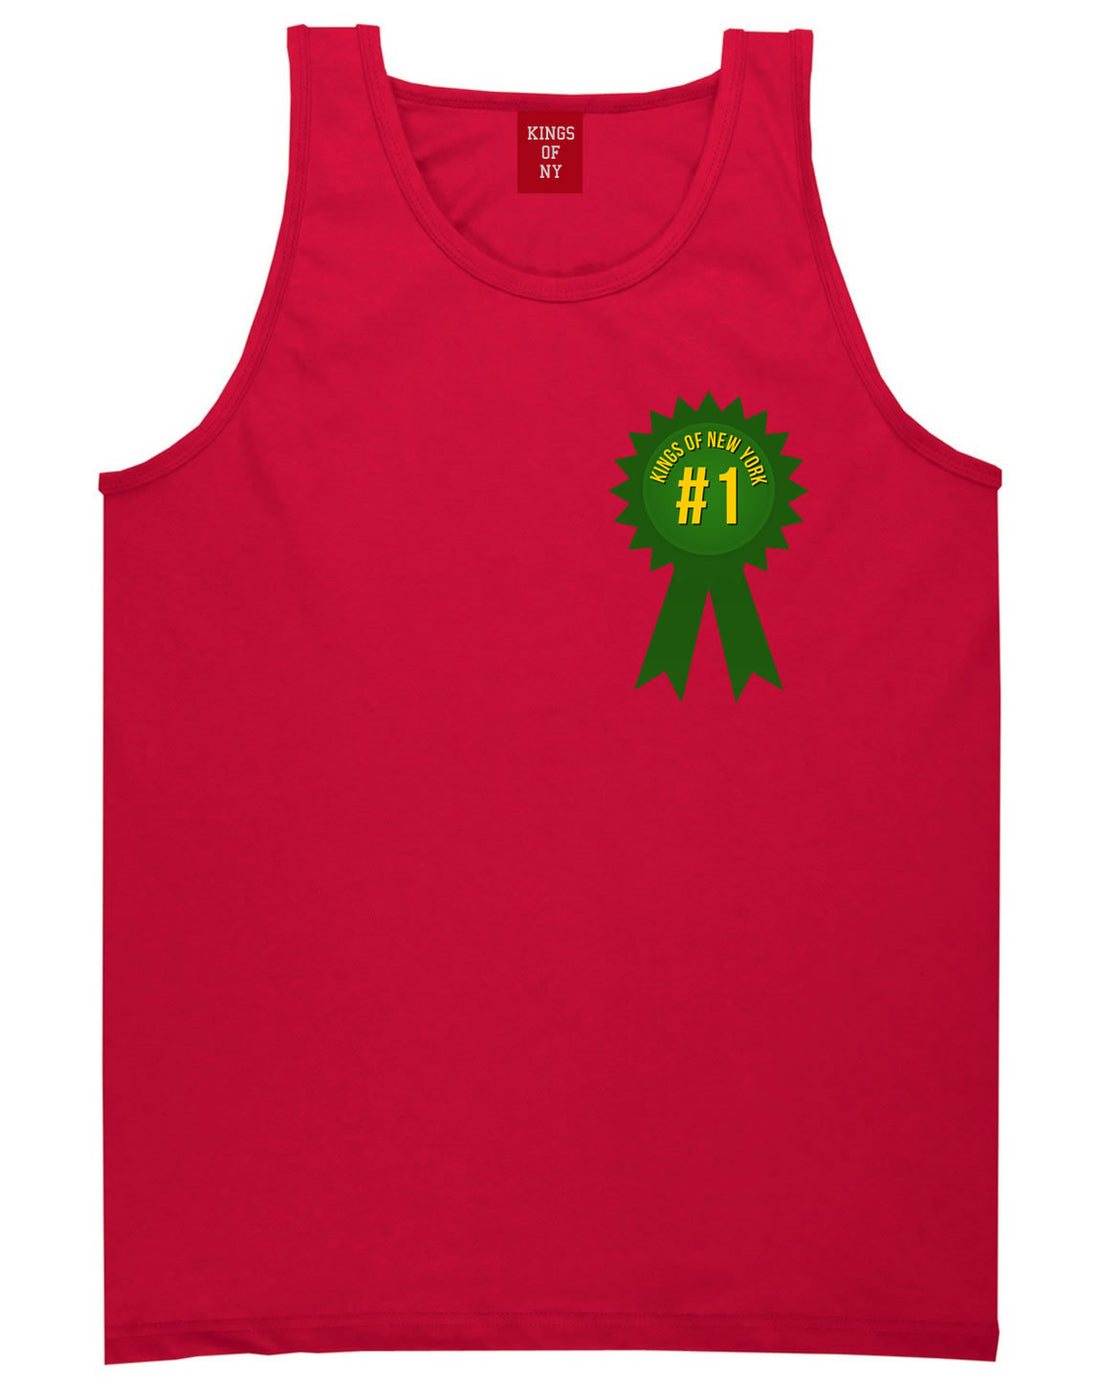 Grand Prize Champions Tank Top in Red